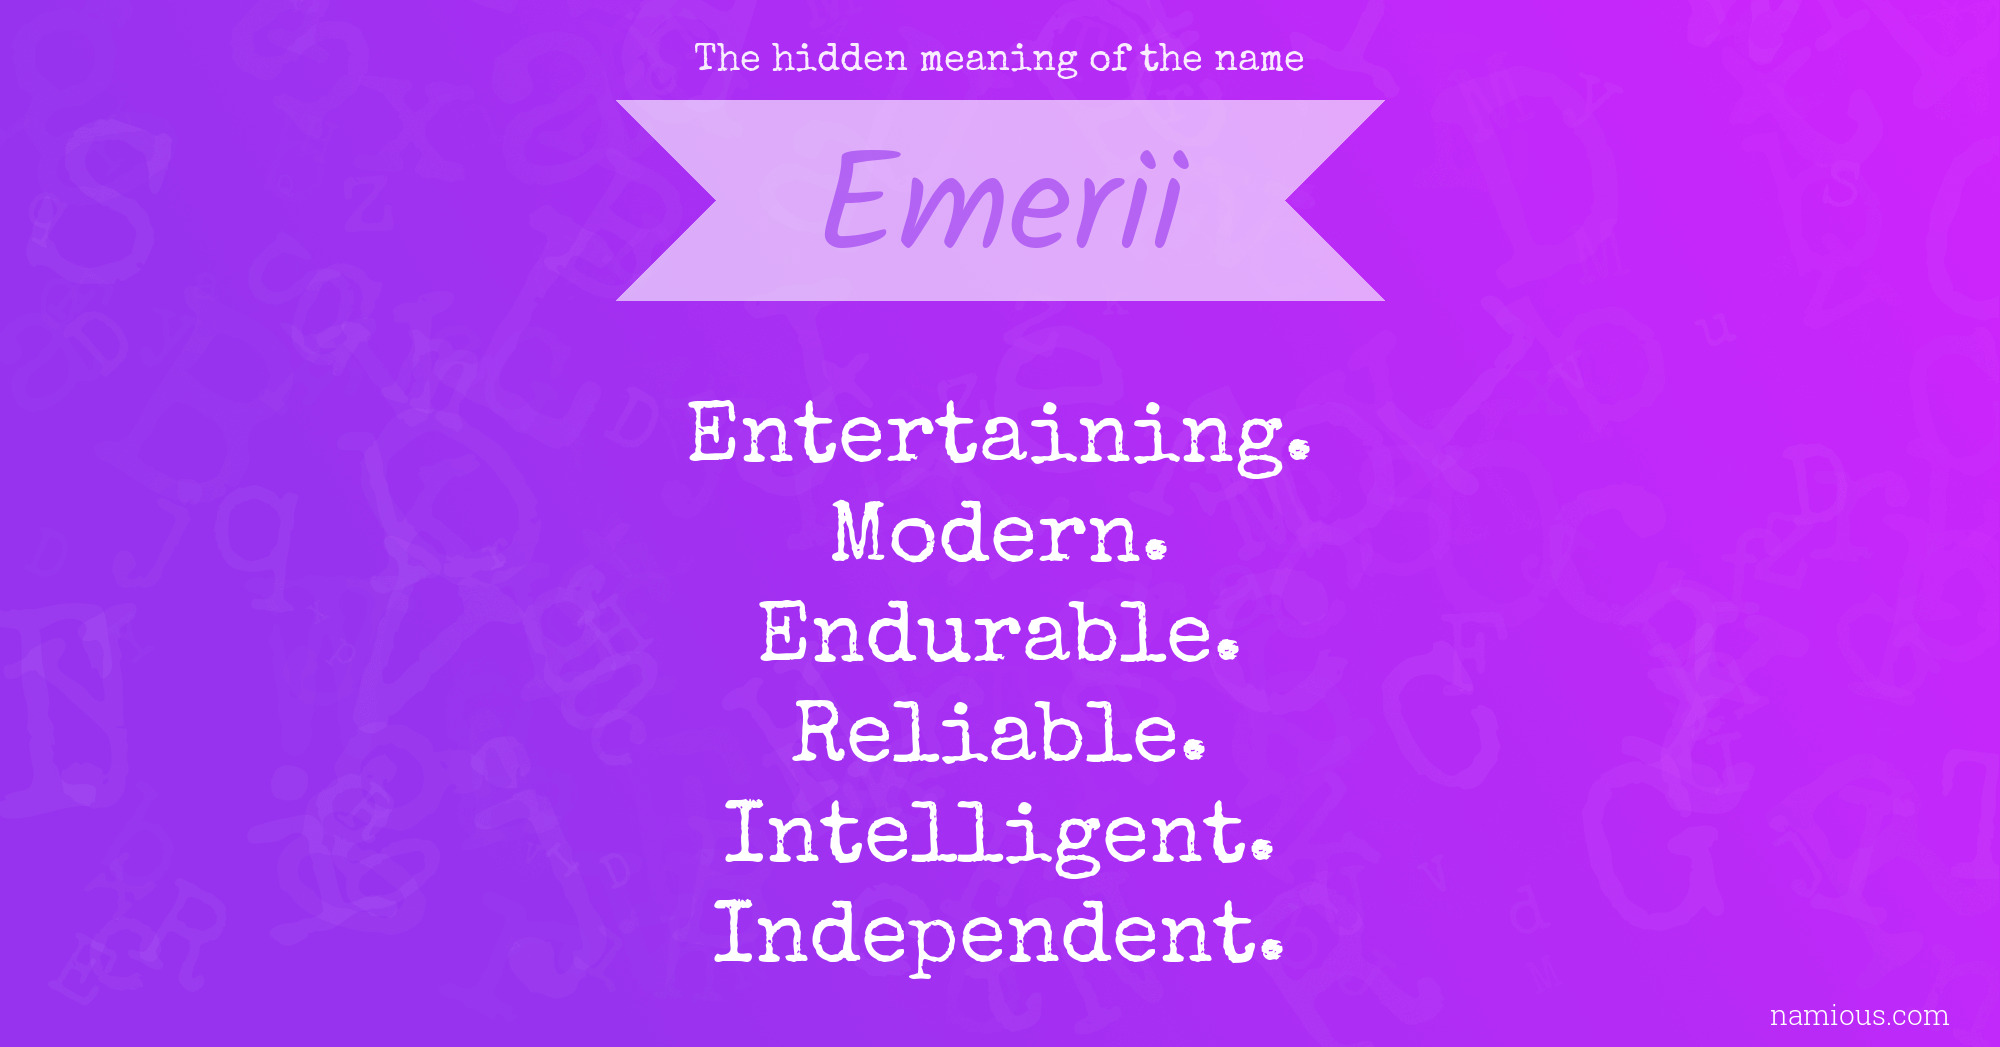 The hidden meaning of the name Emerii